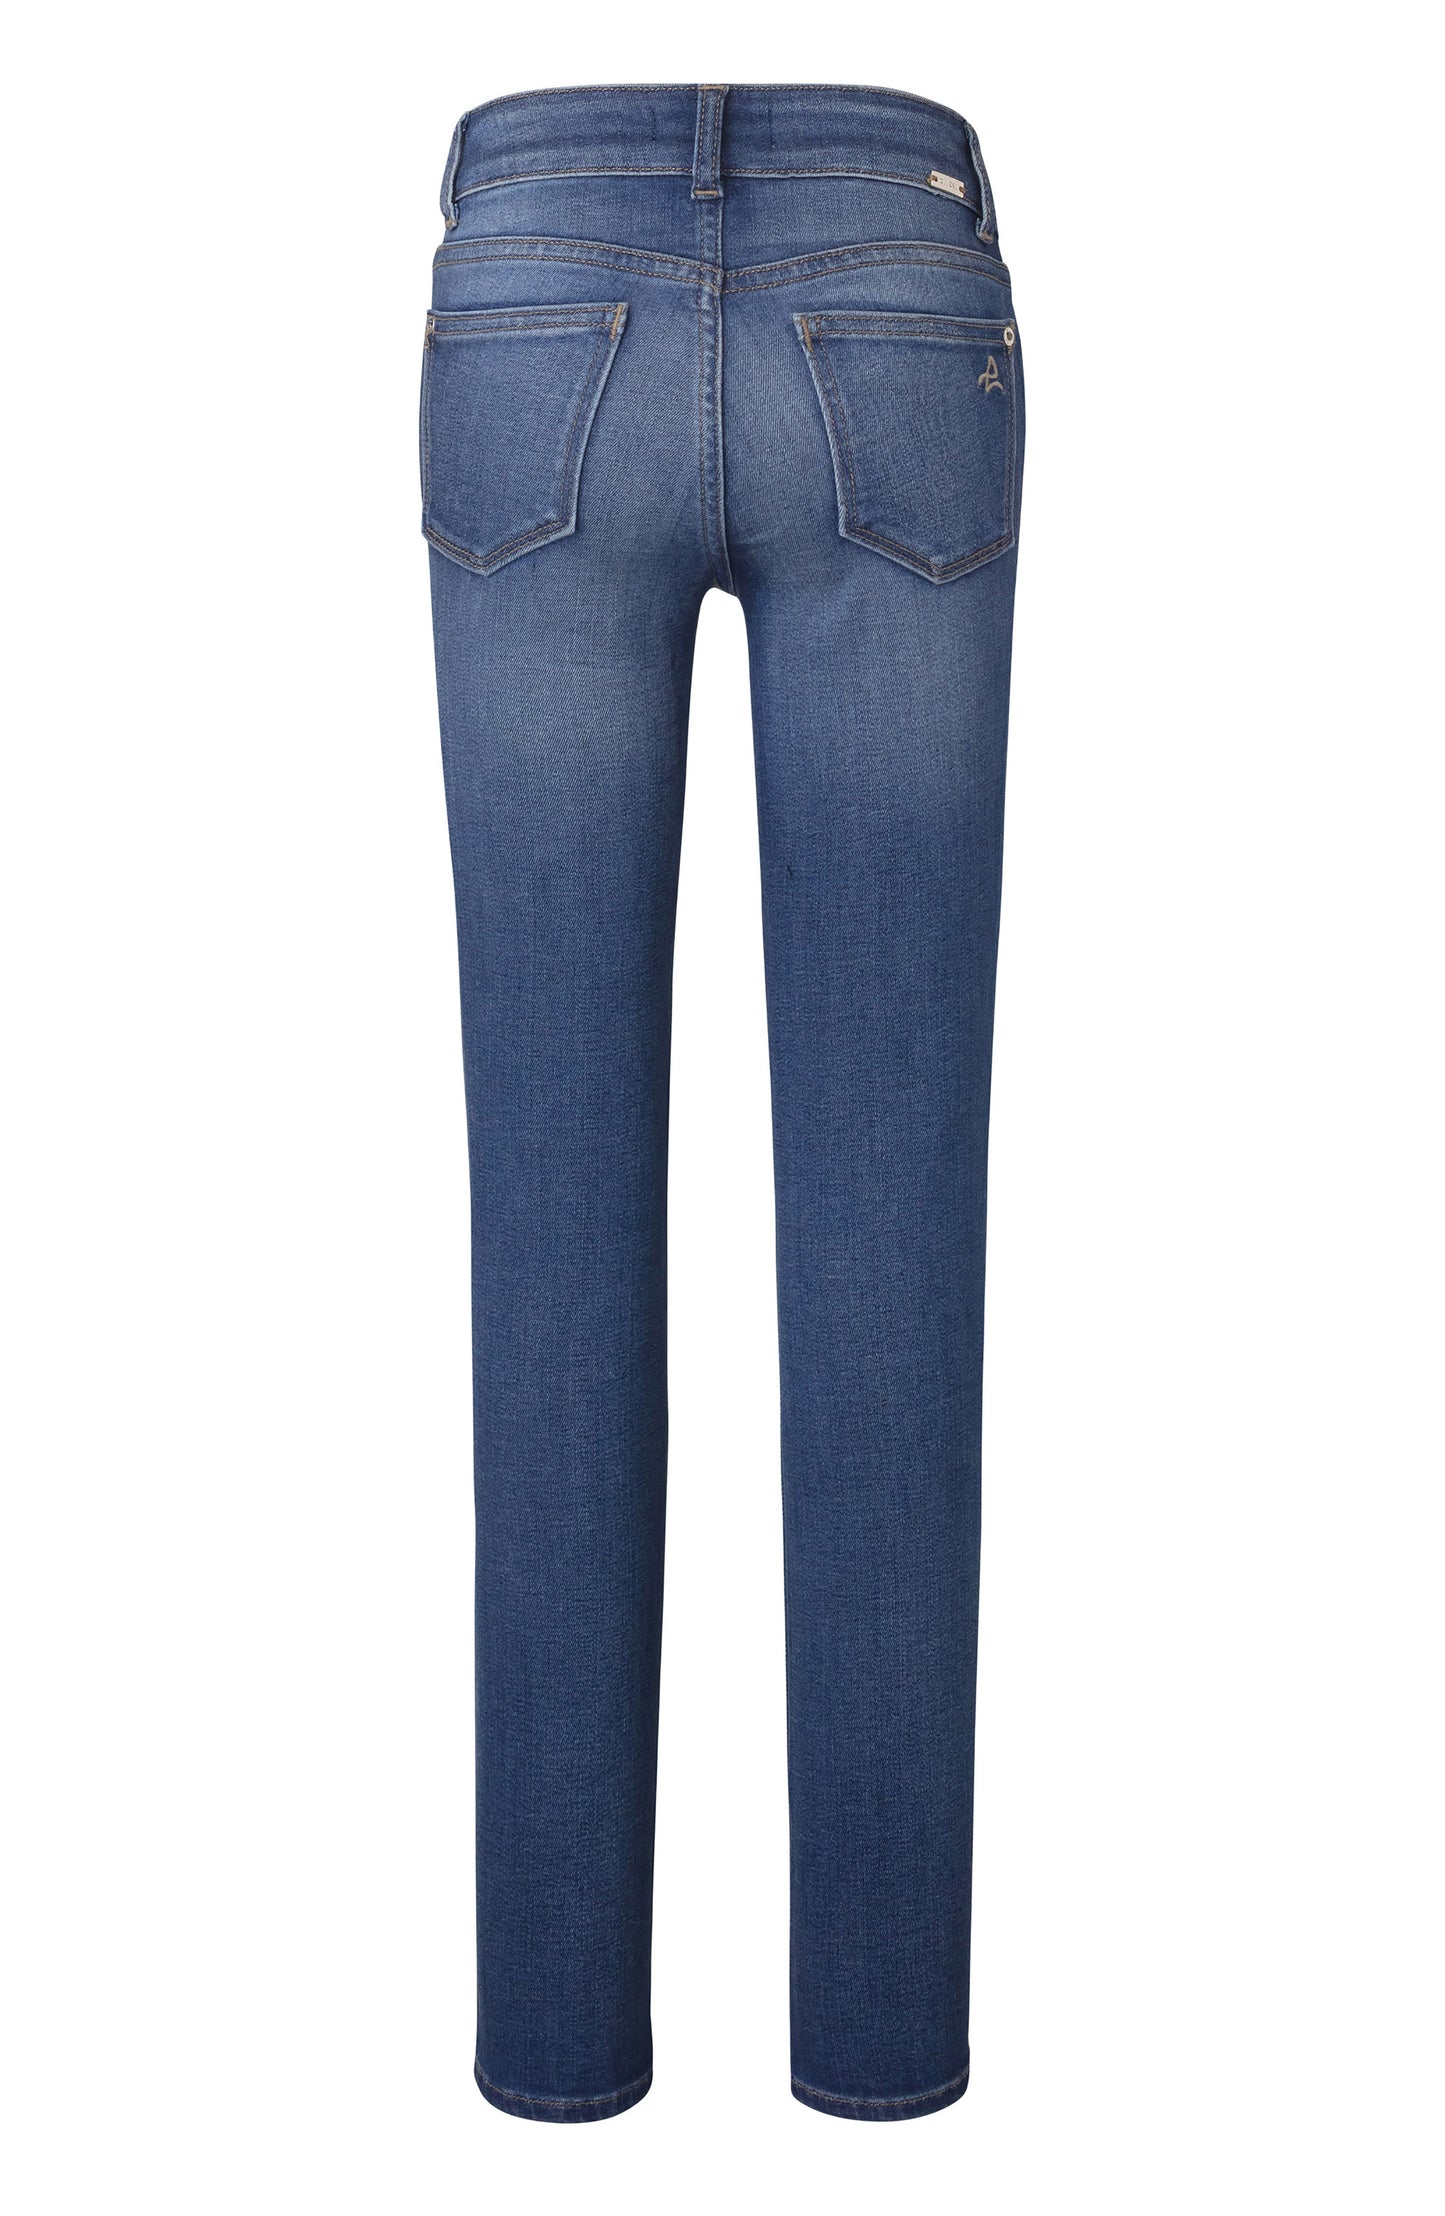 DL1961 Mid Rise Skinny Jeans